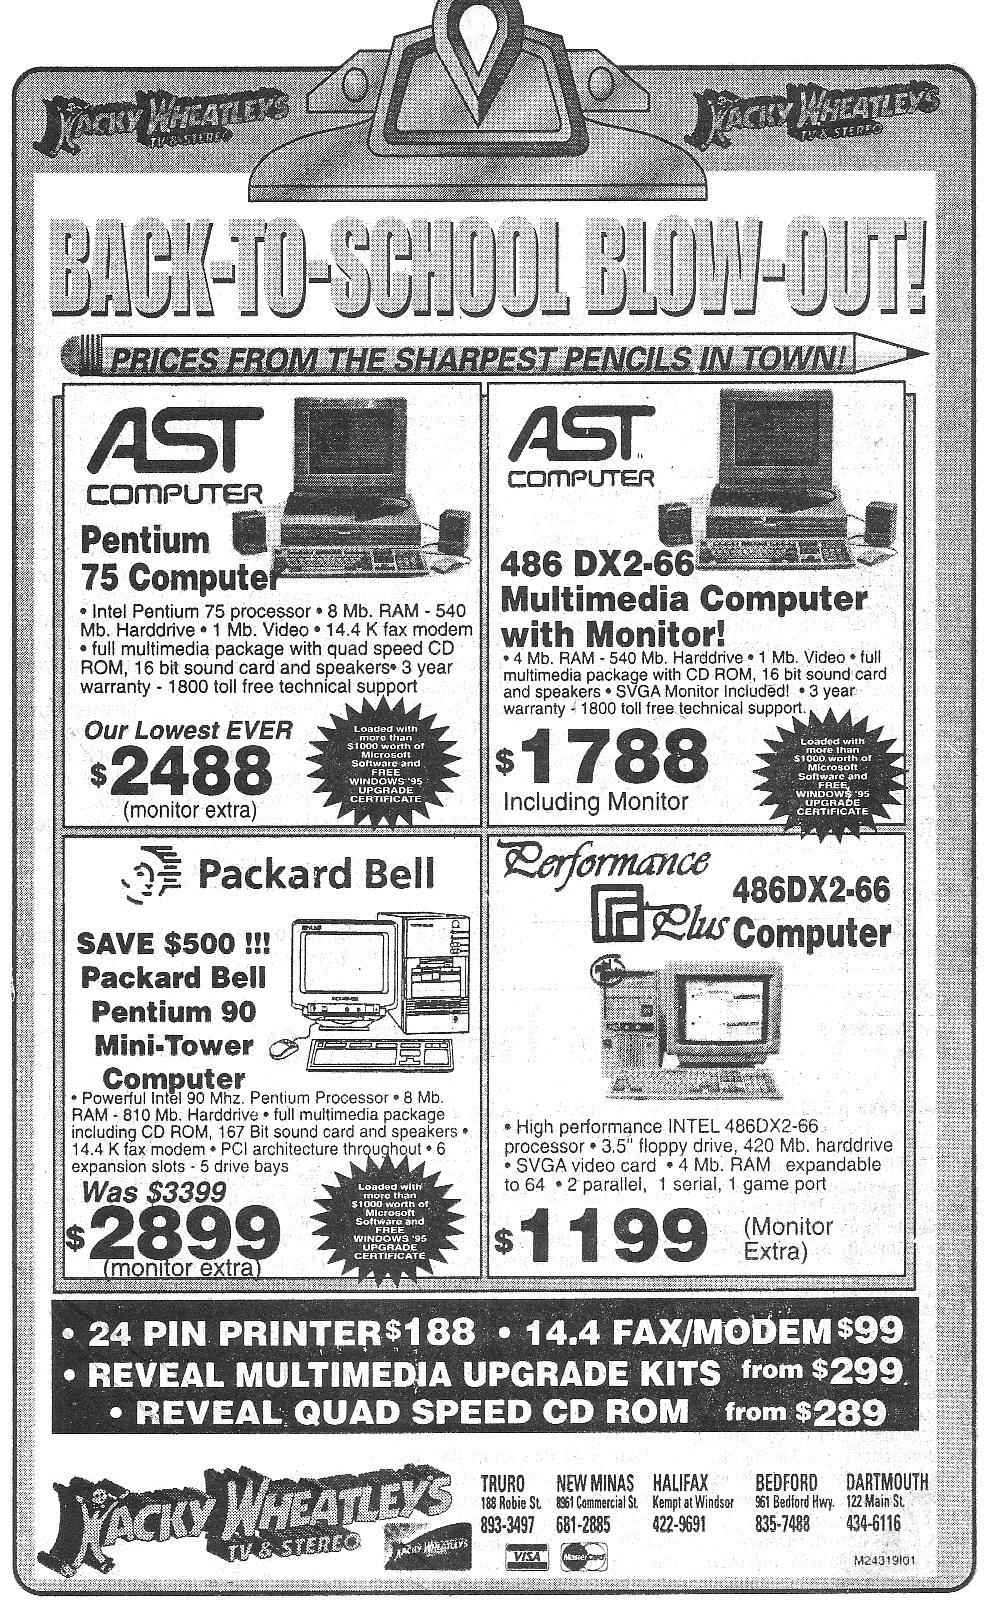 Personal computers for sale in Halifax, 31 August 1995